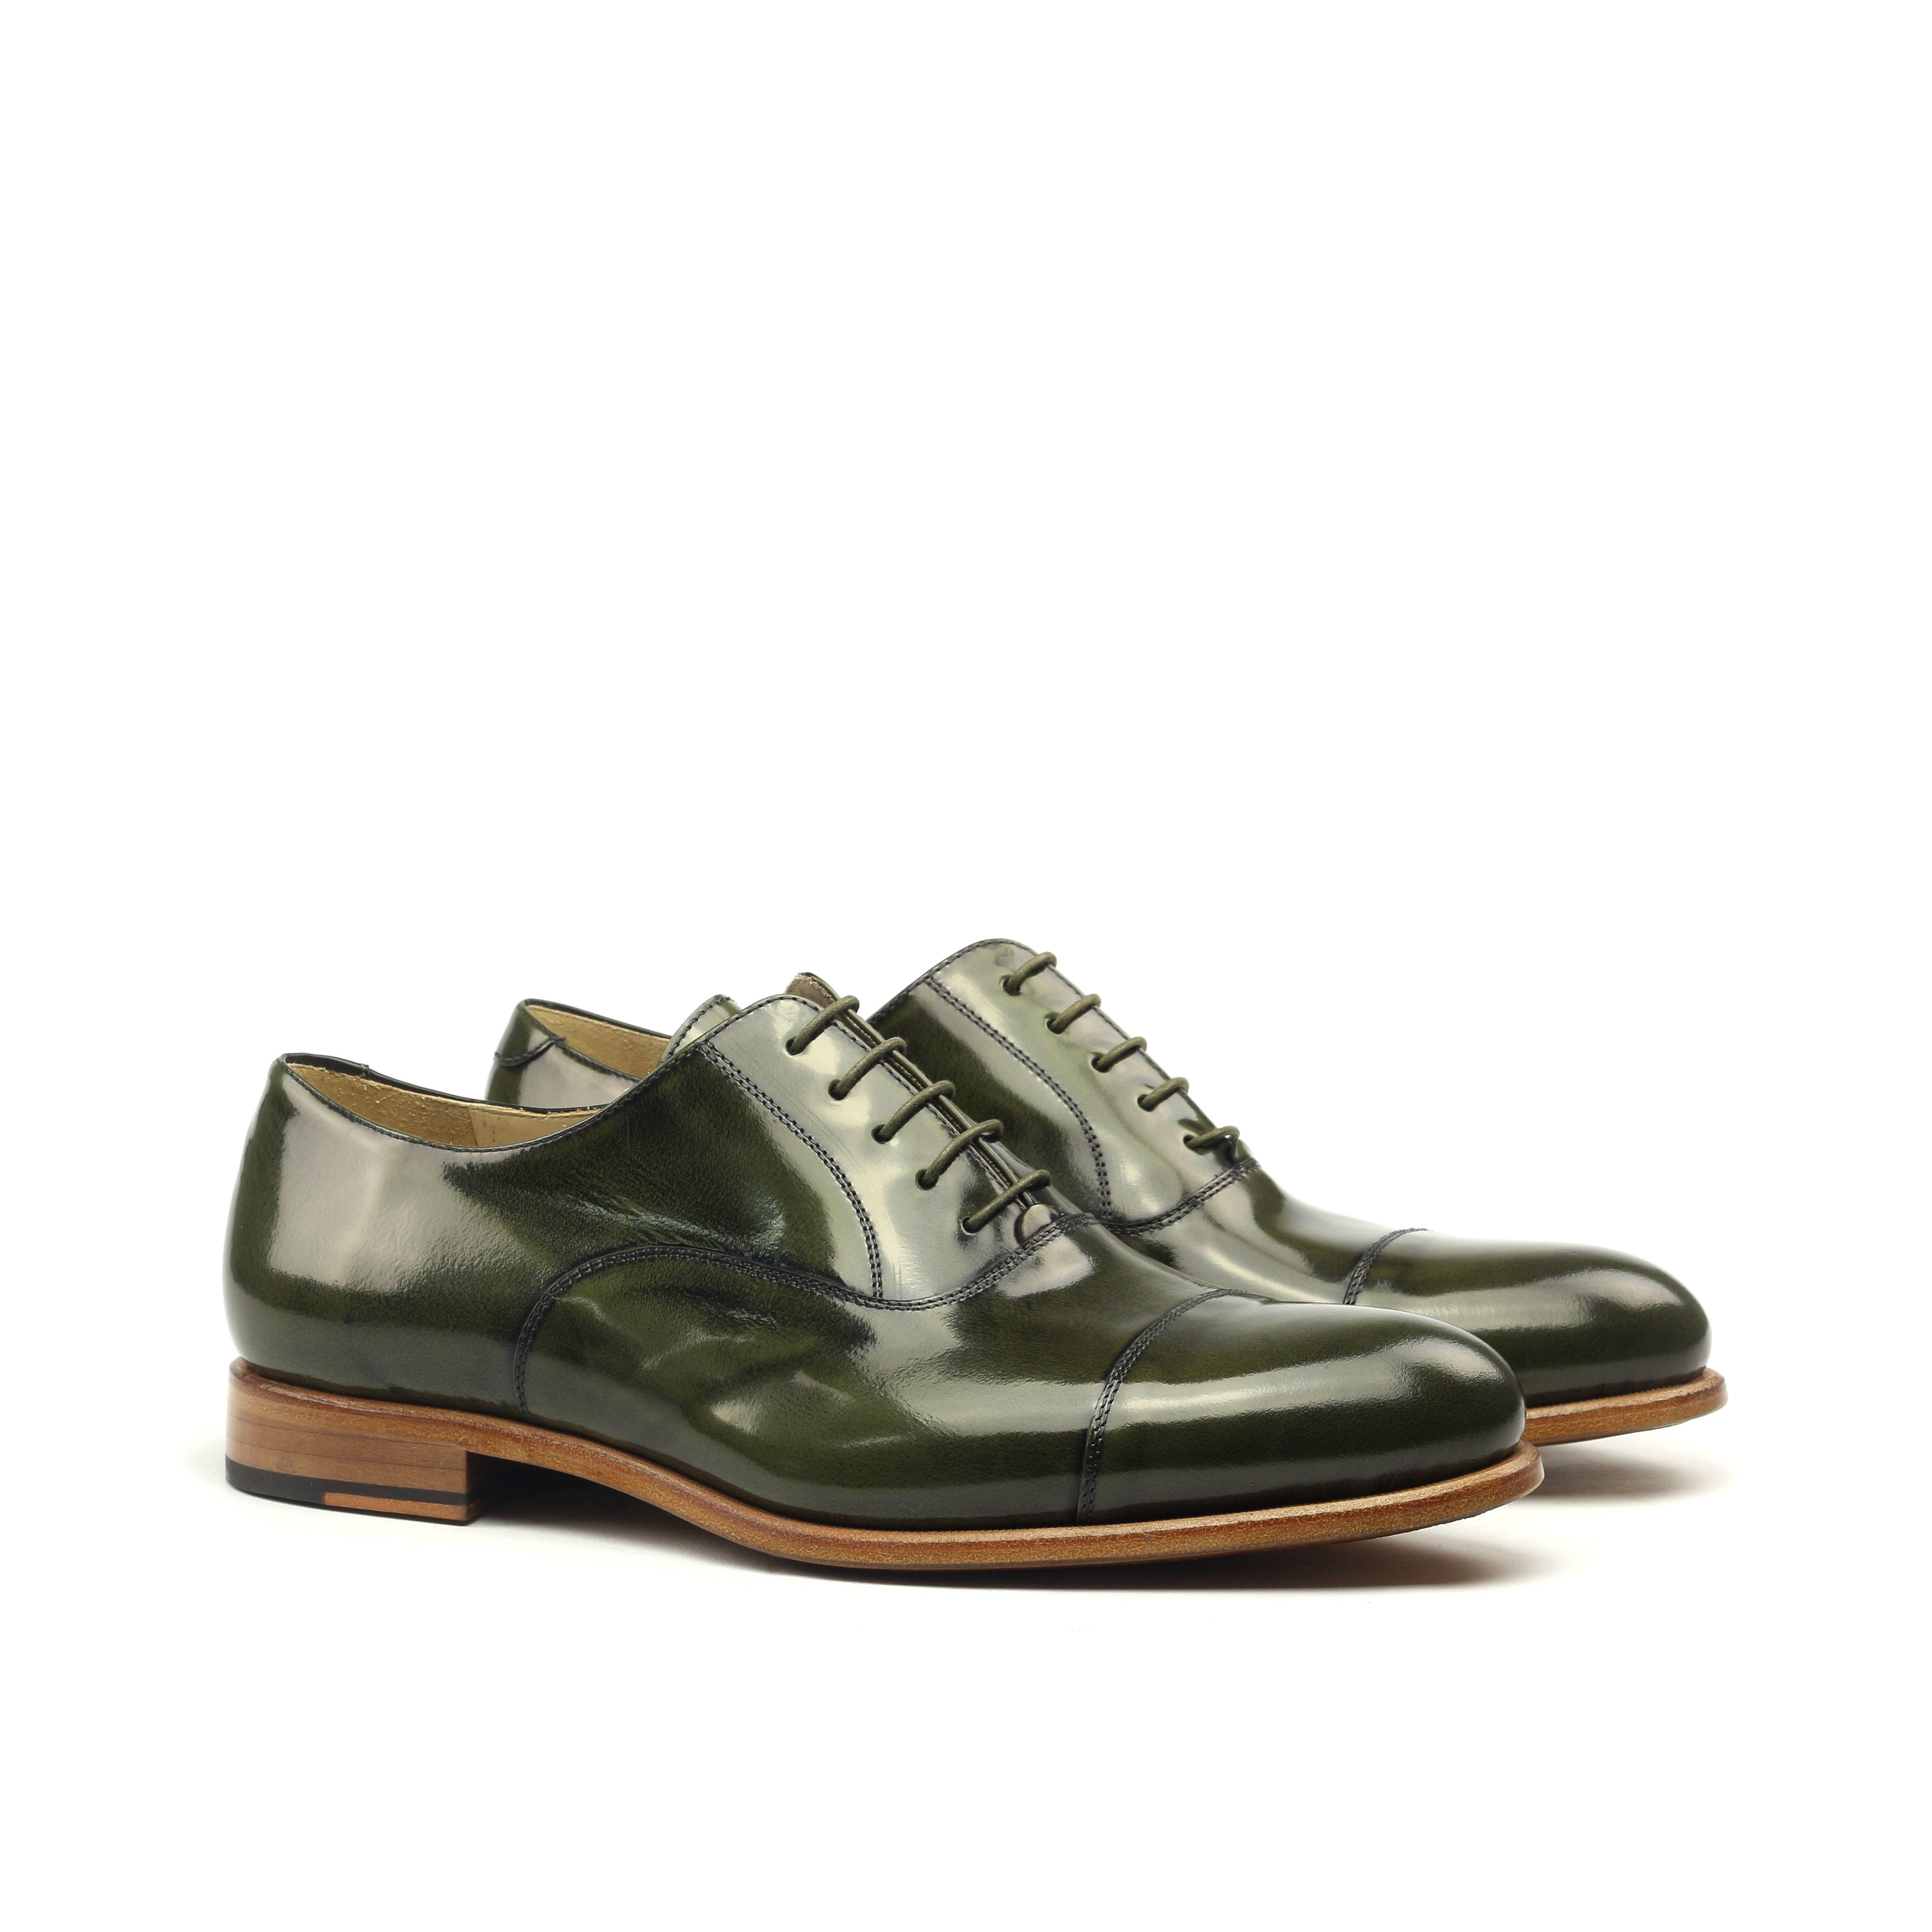 MANOR OF LONDON 'The Oxford' Polished Green Calfskin Shoe Luxury Custom Initials Monogrammed Front Side View